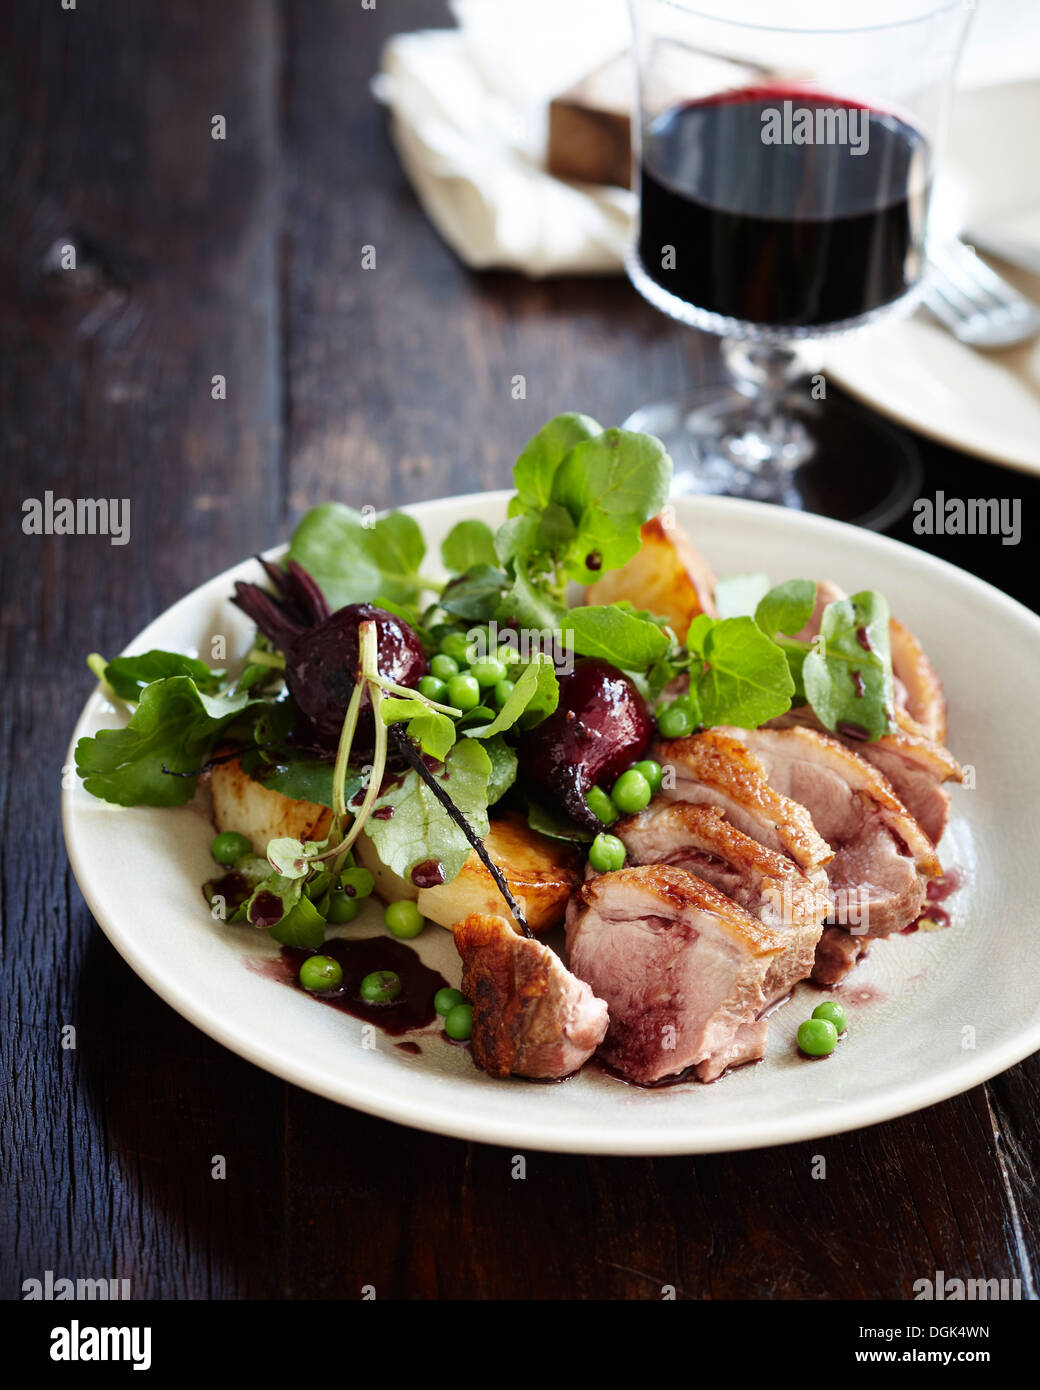 Duck salad with pinot jus and vegetables Stock Photo